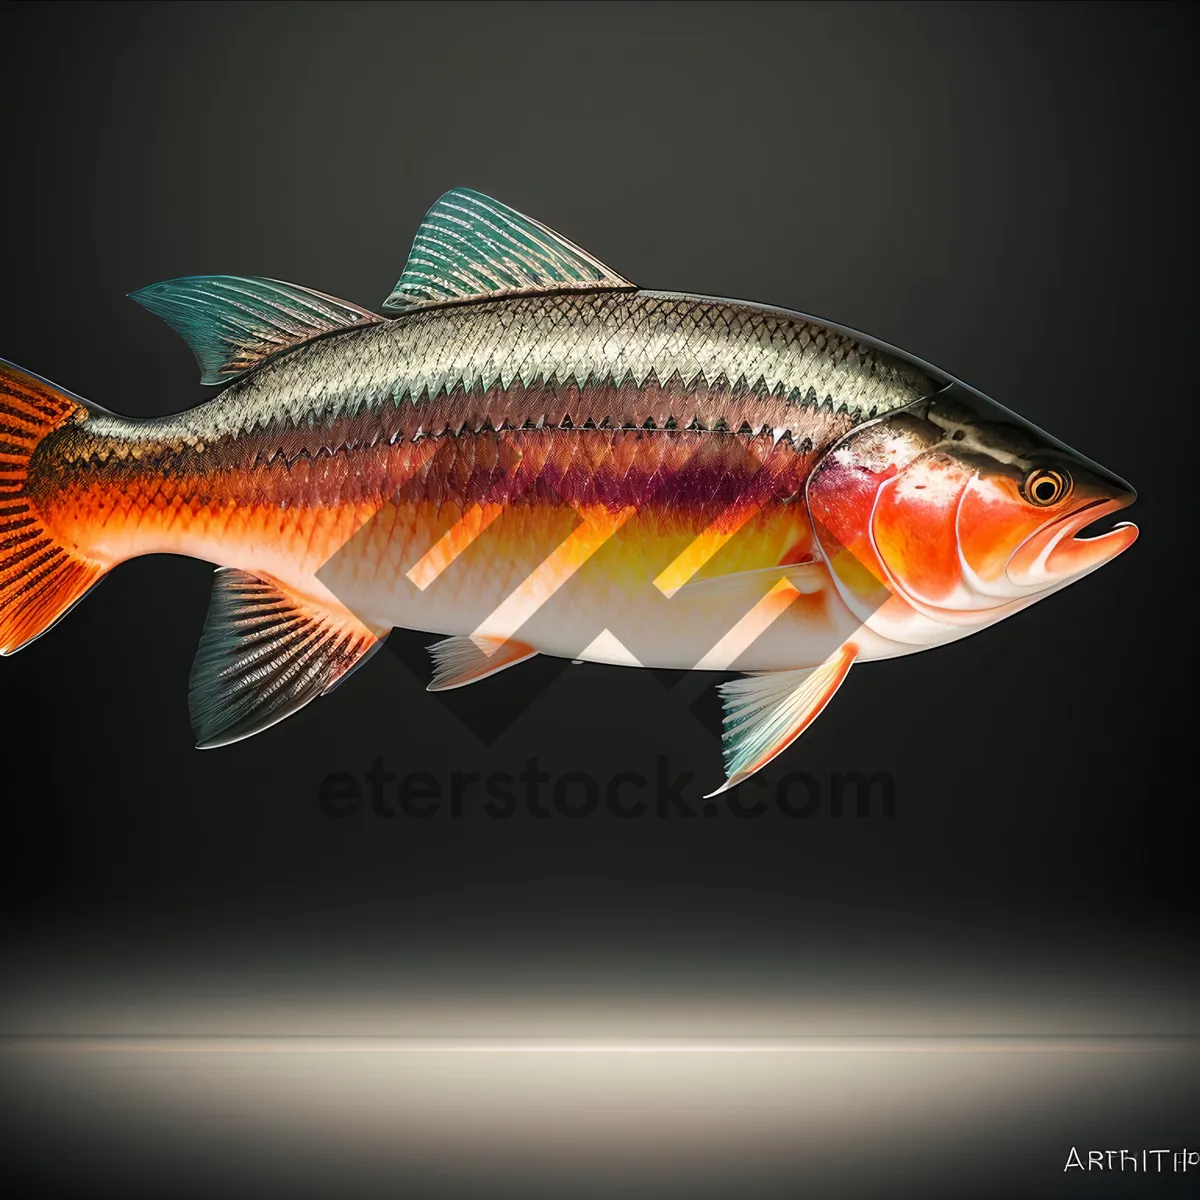 Picture of Golden Finned Snapper Swimming in Aquarium